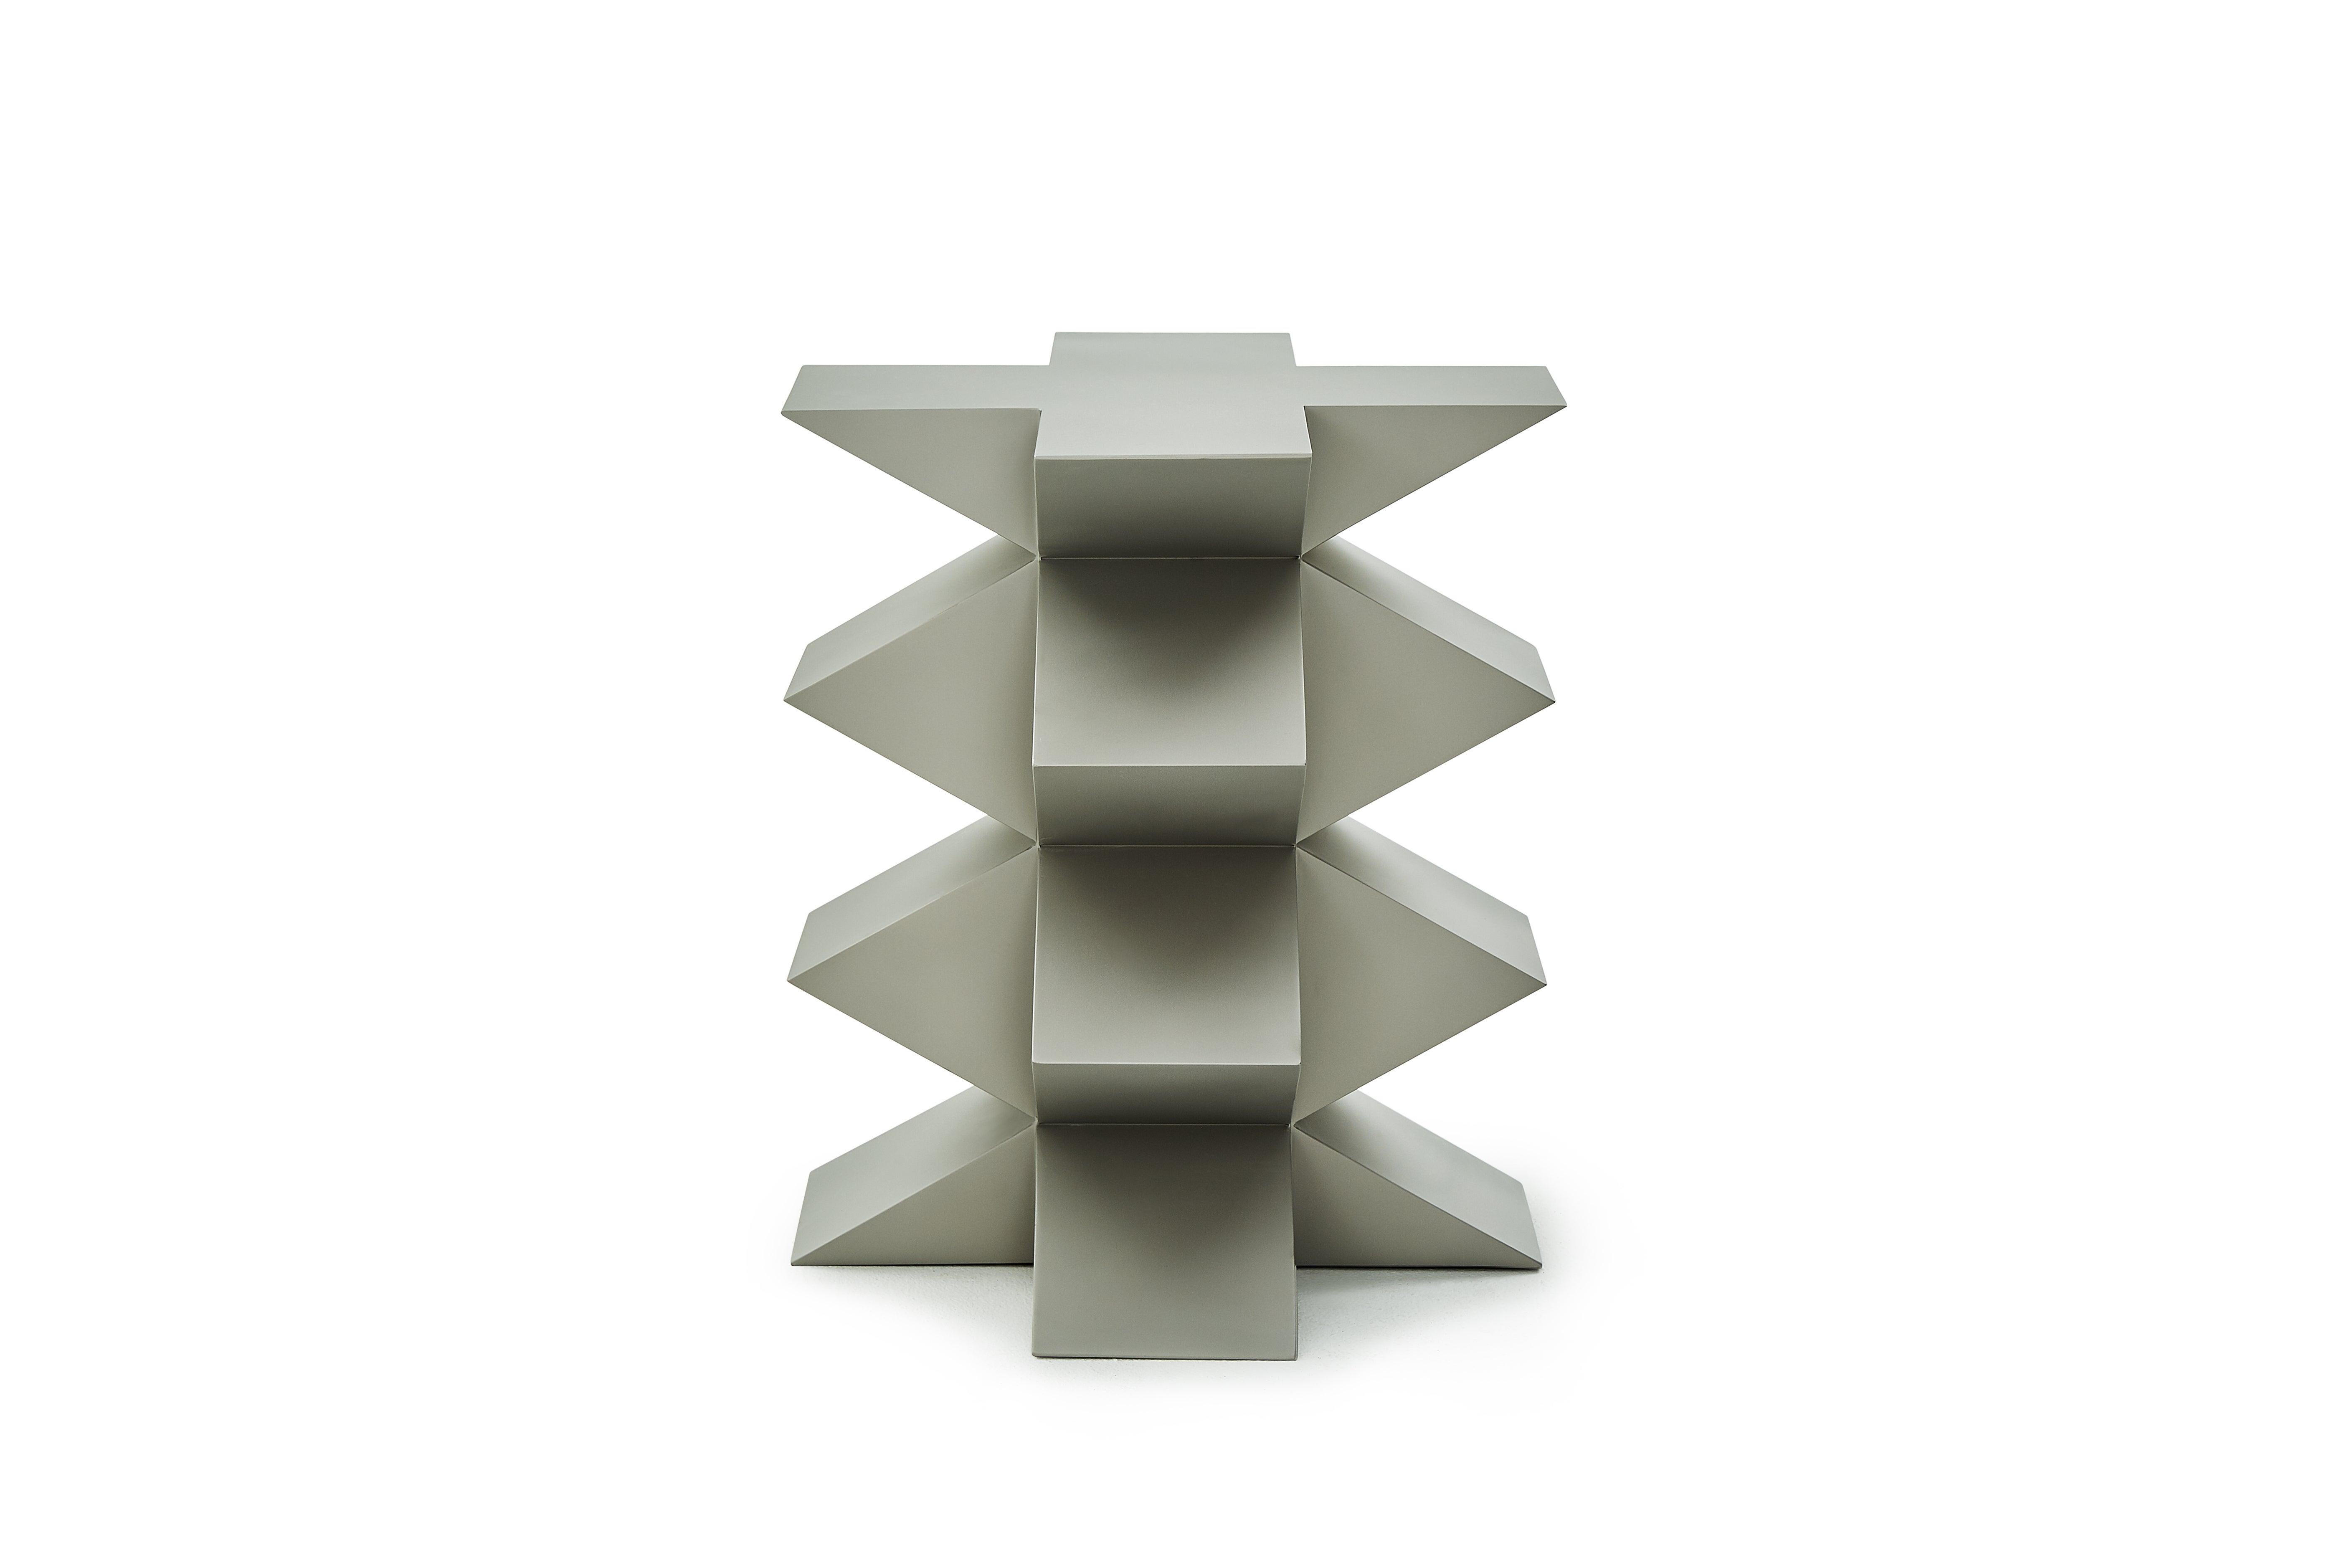 This sculptural side table is from the studio Brancusi collection designed and made by China-based artist Danjie Yan. The works debutted at Sifang Art Museum at Nanjing, China.

Danjie was inspired by the Pioneer of modern sculpture Constantin